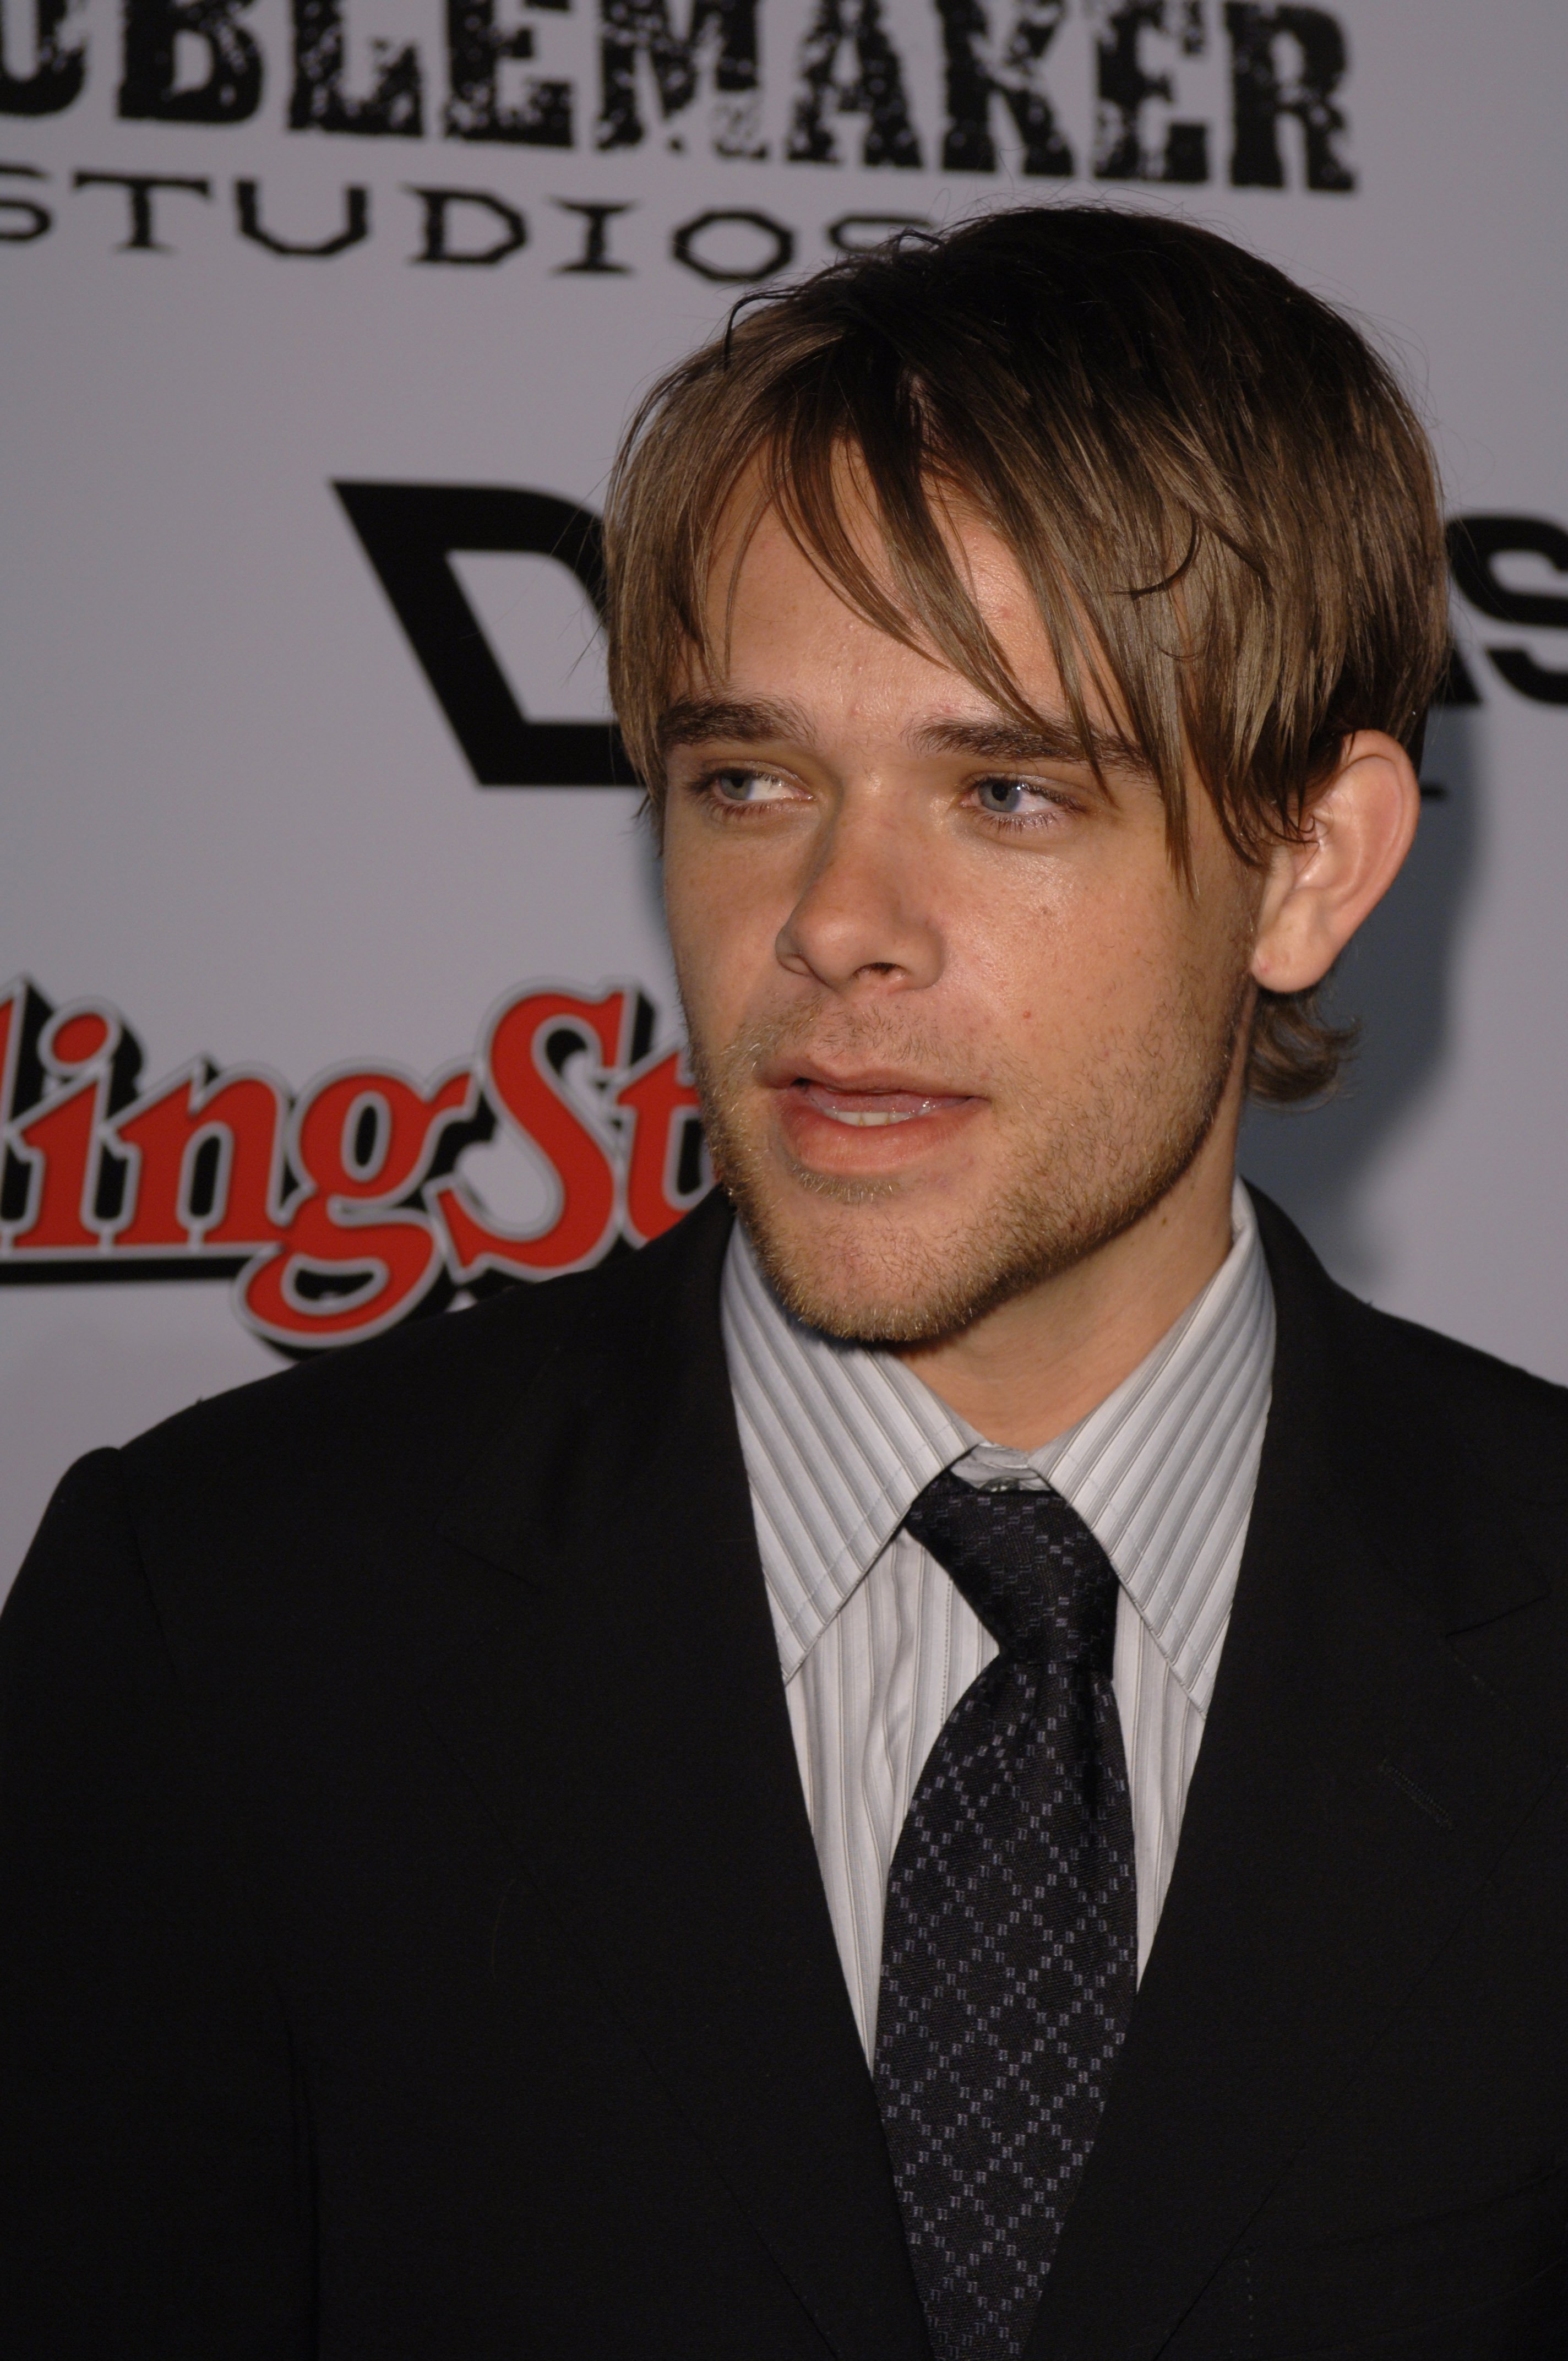 Nick Stahl at the premiere of his new movie "Sin City" on March 28, 2005 in Los Angeles, California | Photo: Shutterstock